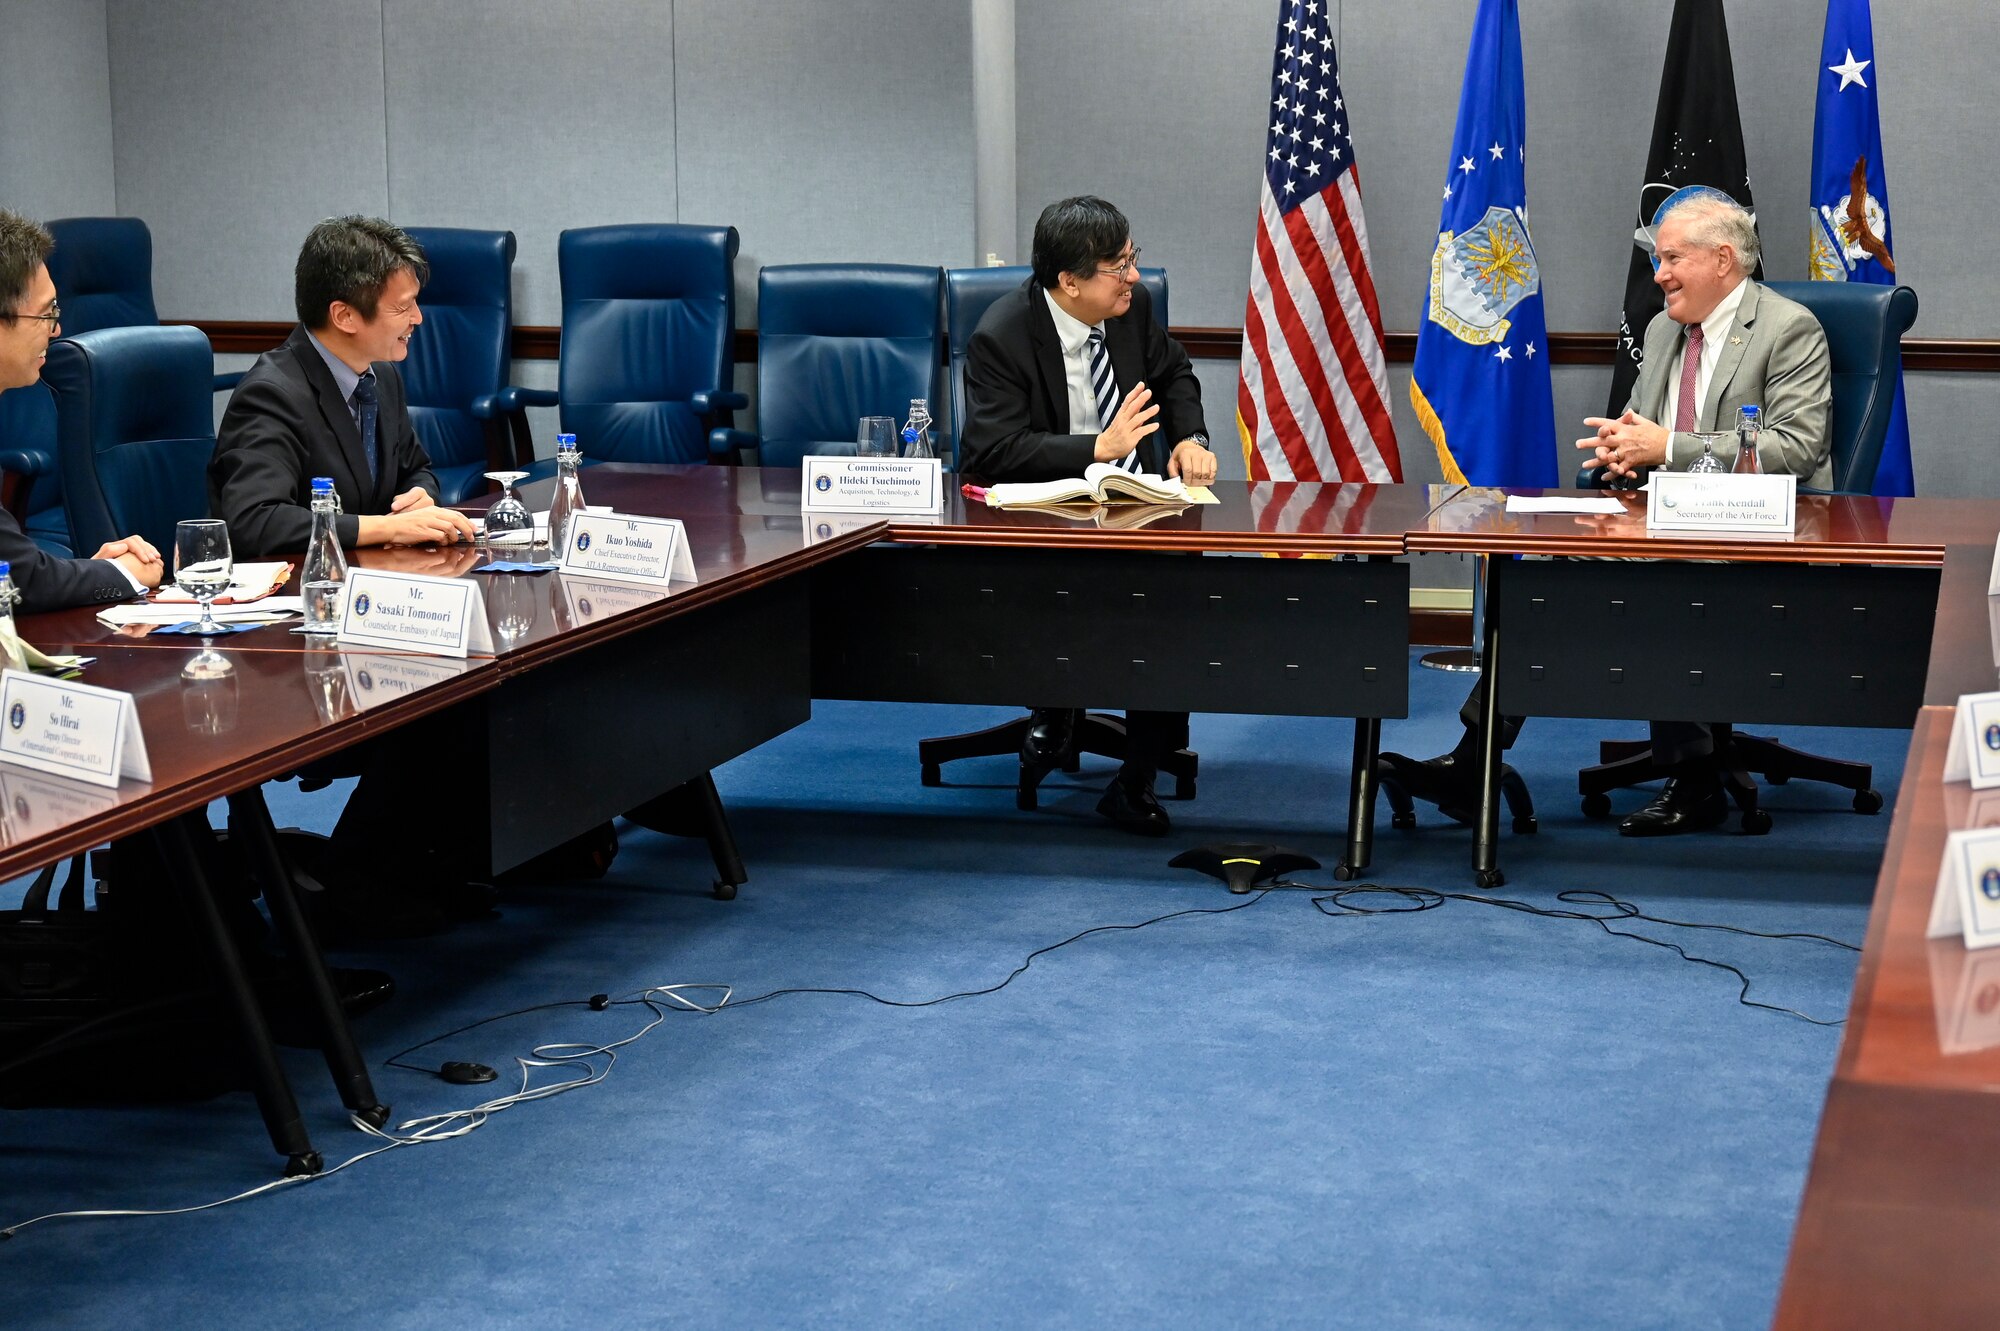 Secretary of the Air Force Frank Kendall speaks with Hideki Tsuchimoto, commissioner of the Acquisition, Technology and Logistics Agency, Japanese Ministry of Defense.